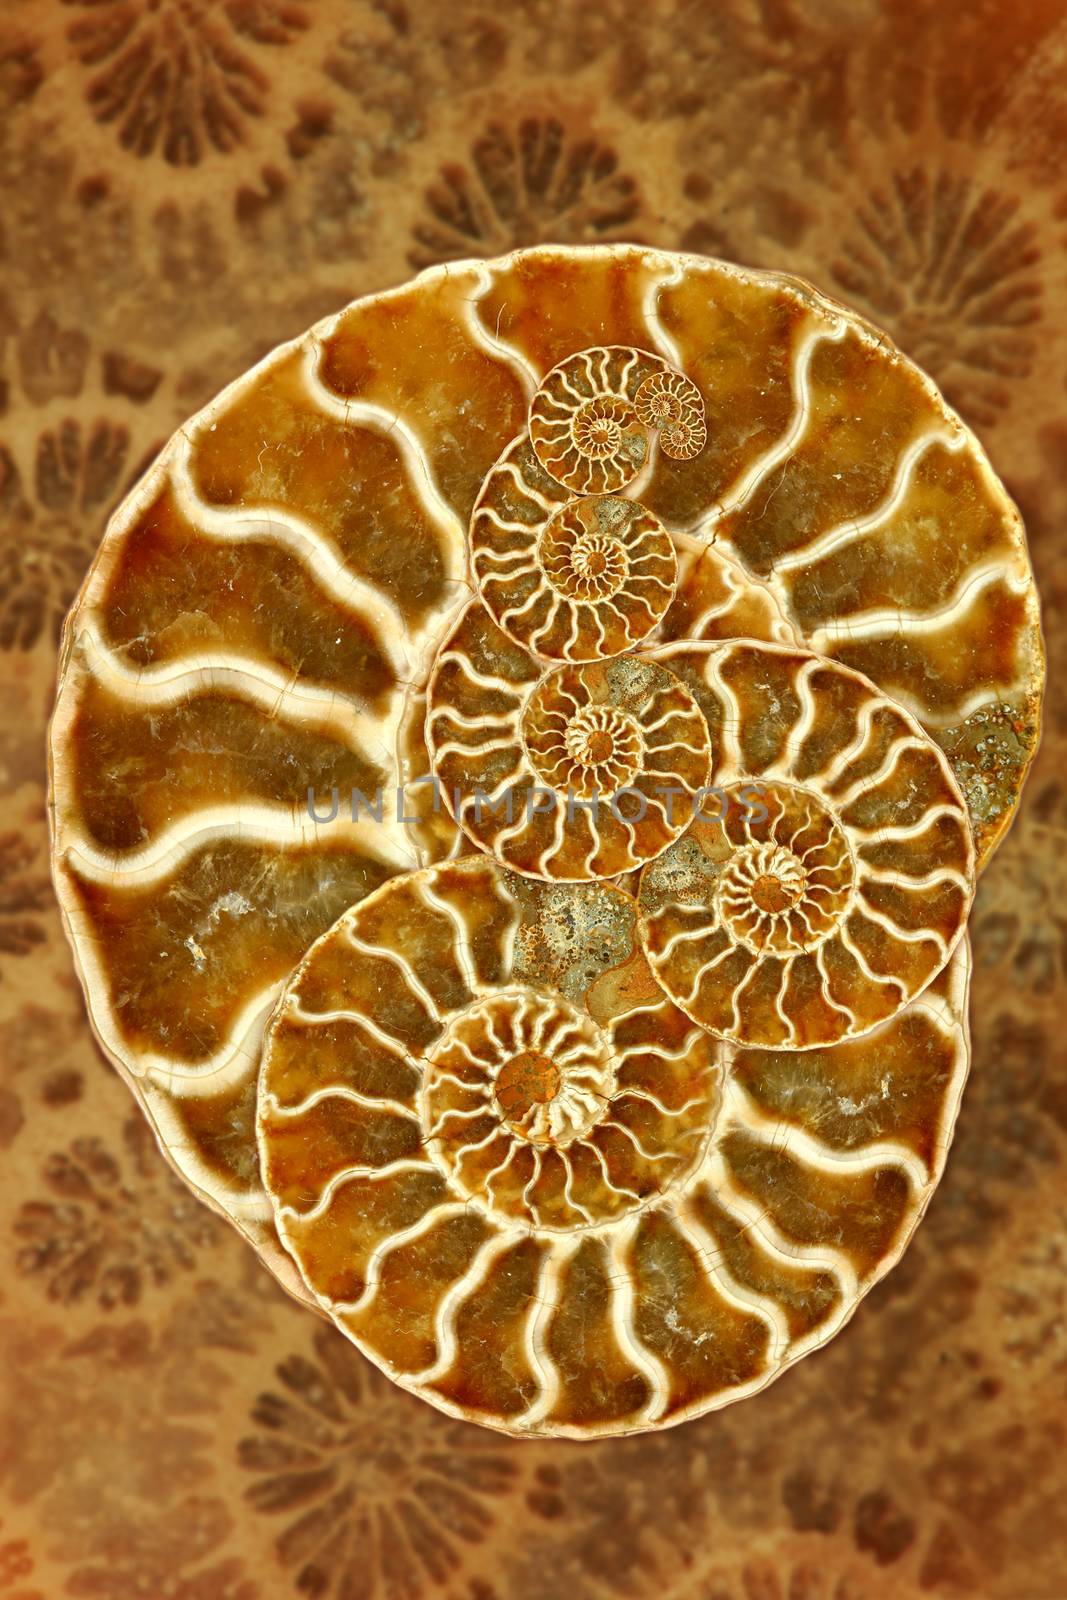 Striking Image of a Nautilus in Montage Art Form